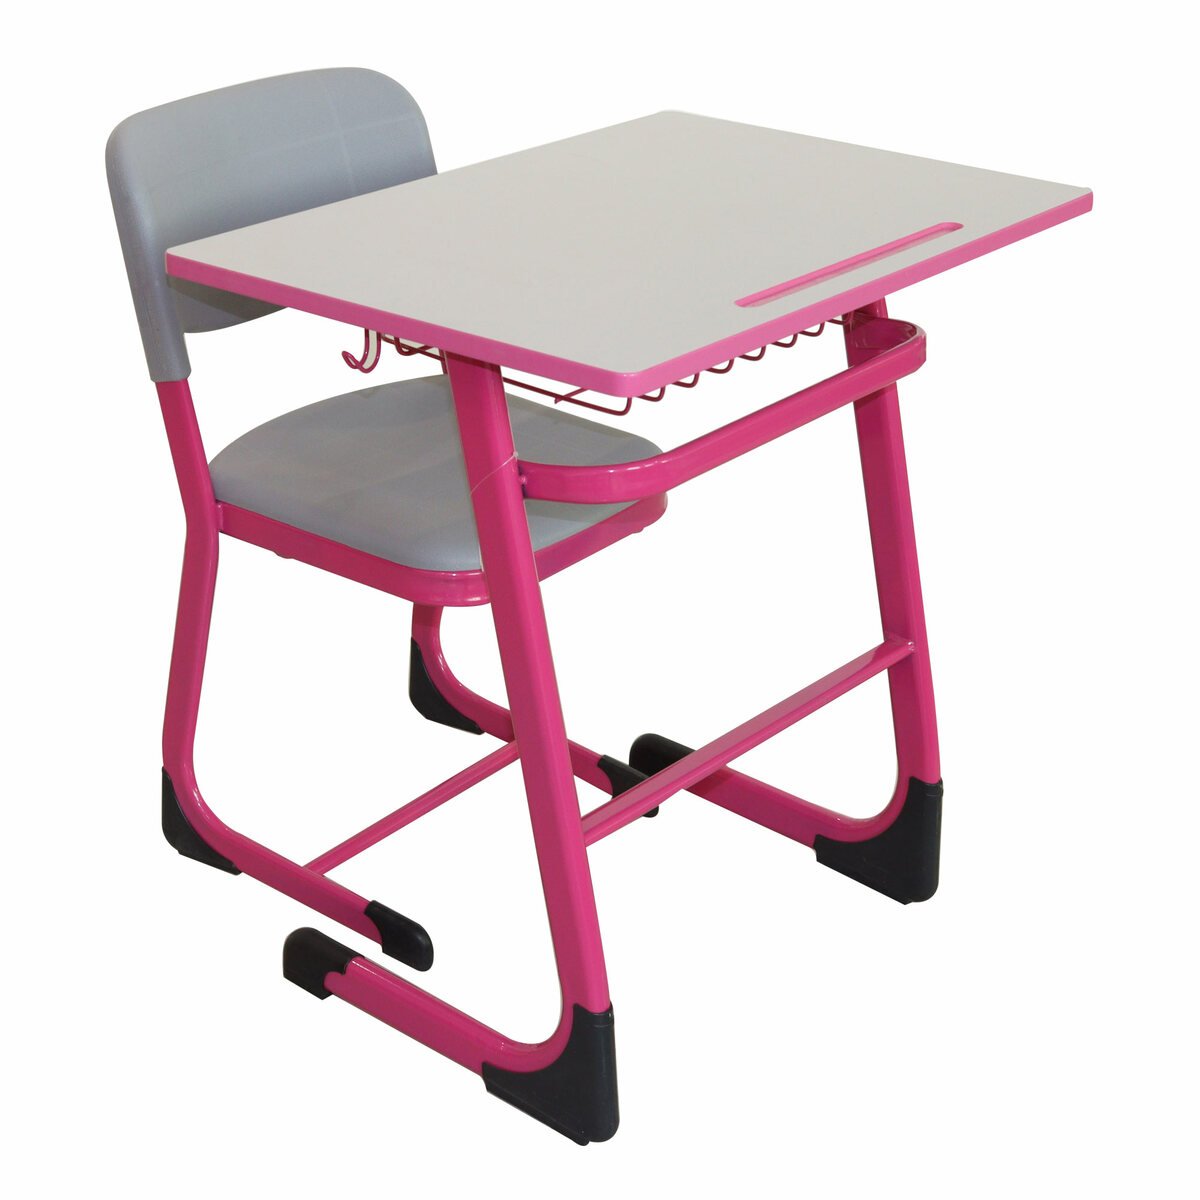 Maple Leaf Home Study Table + Chair D01 Table Size: L70 x W50 x H75cm Pink